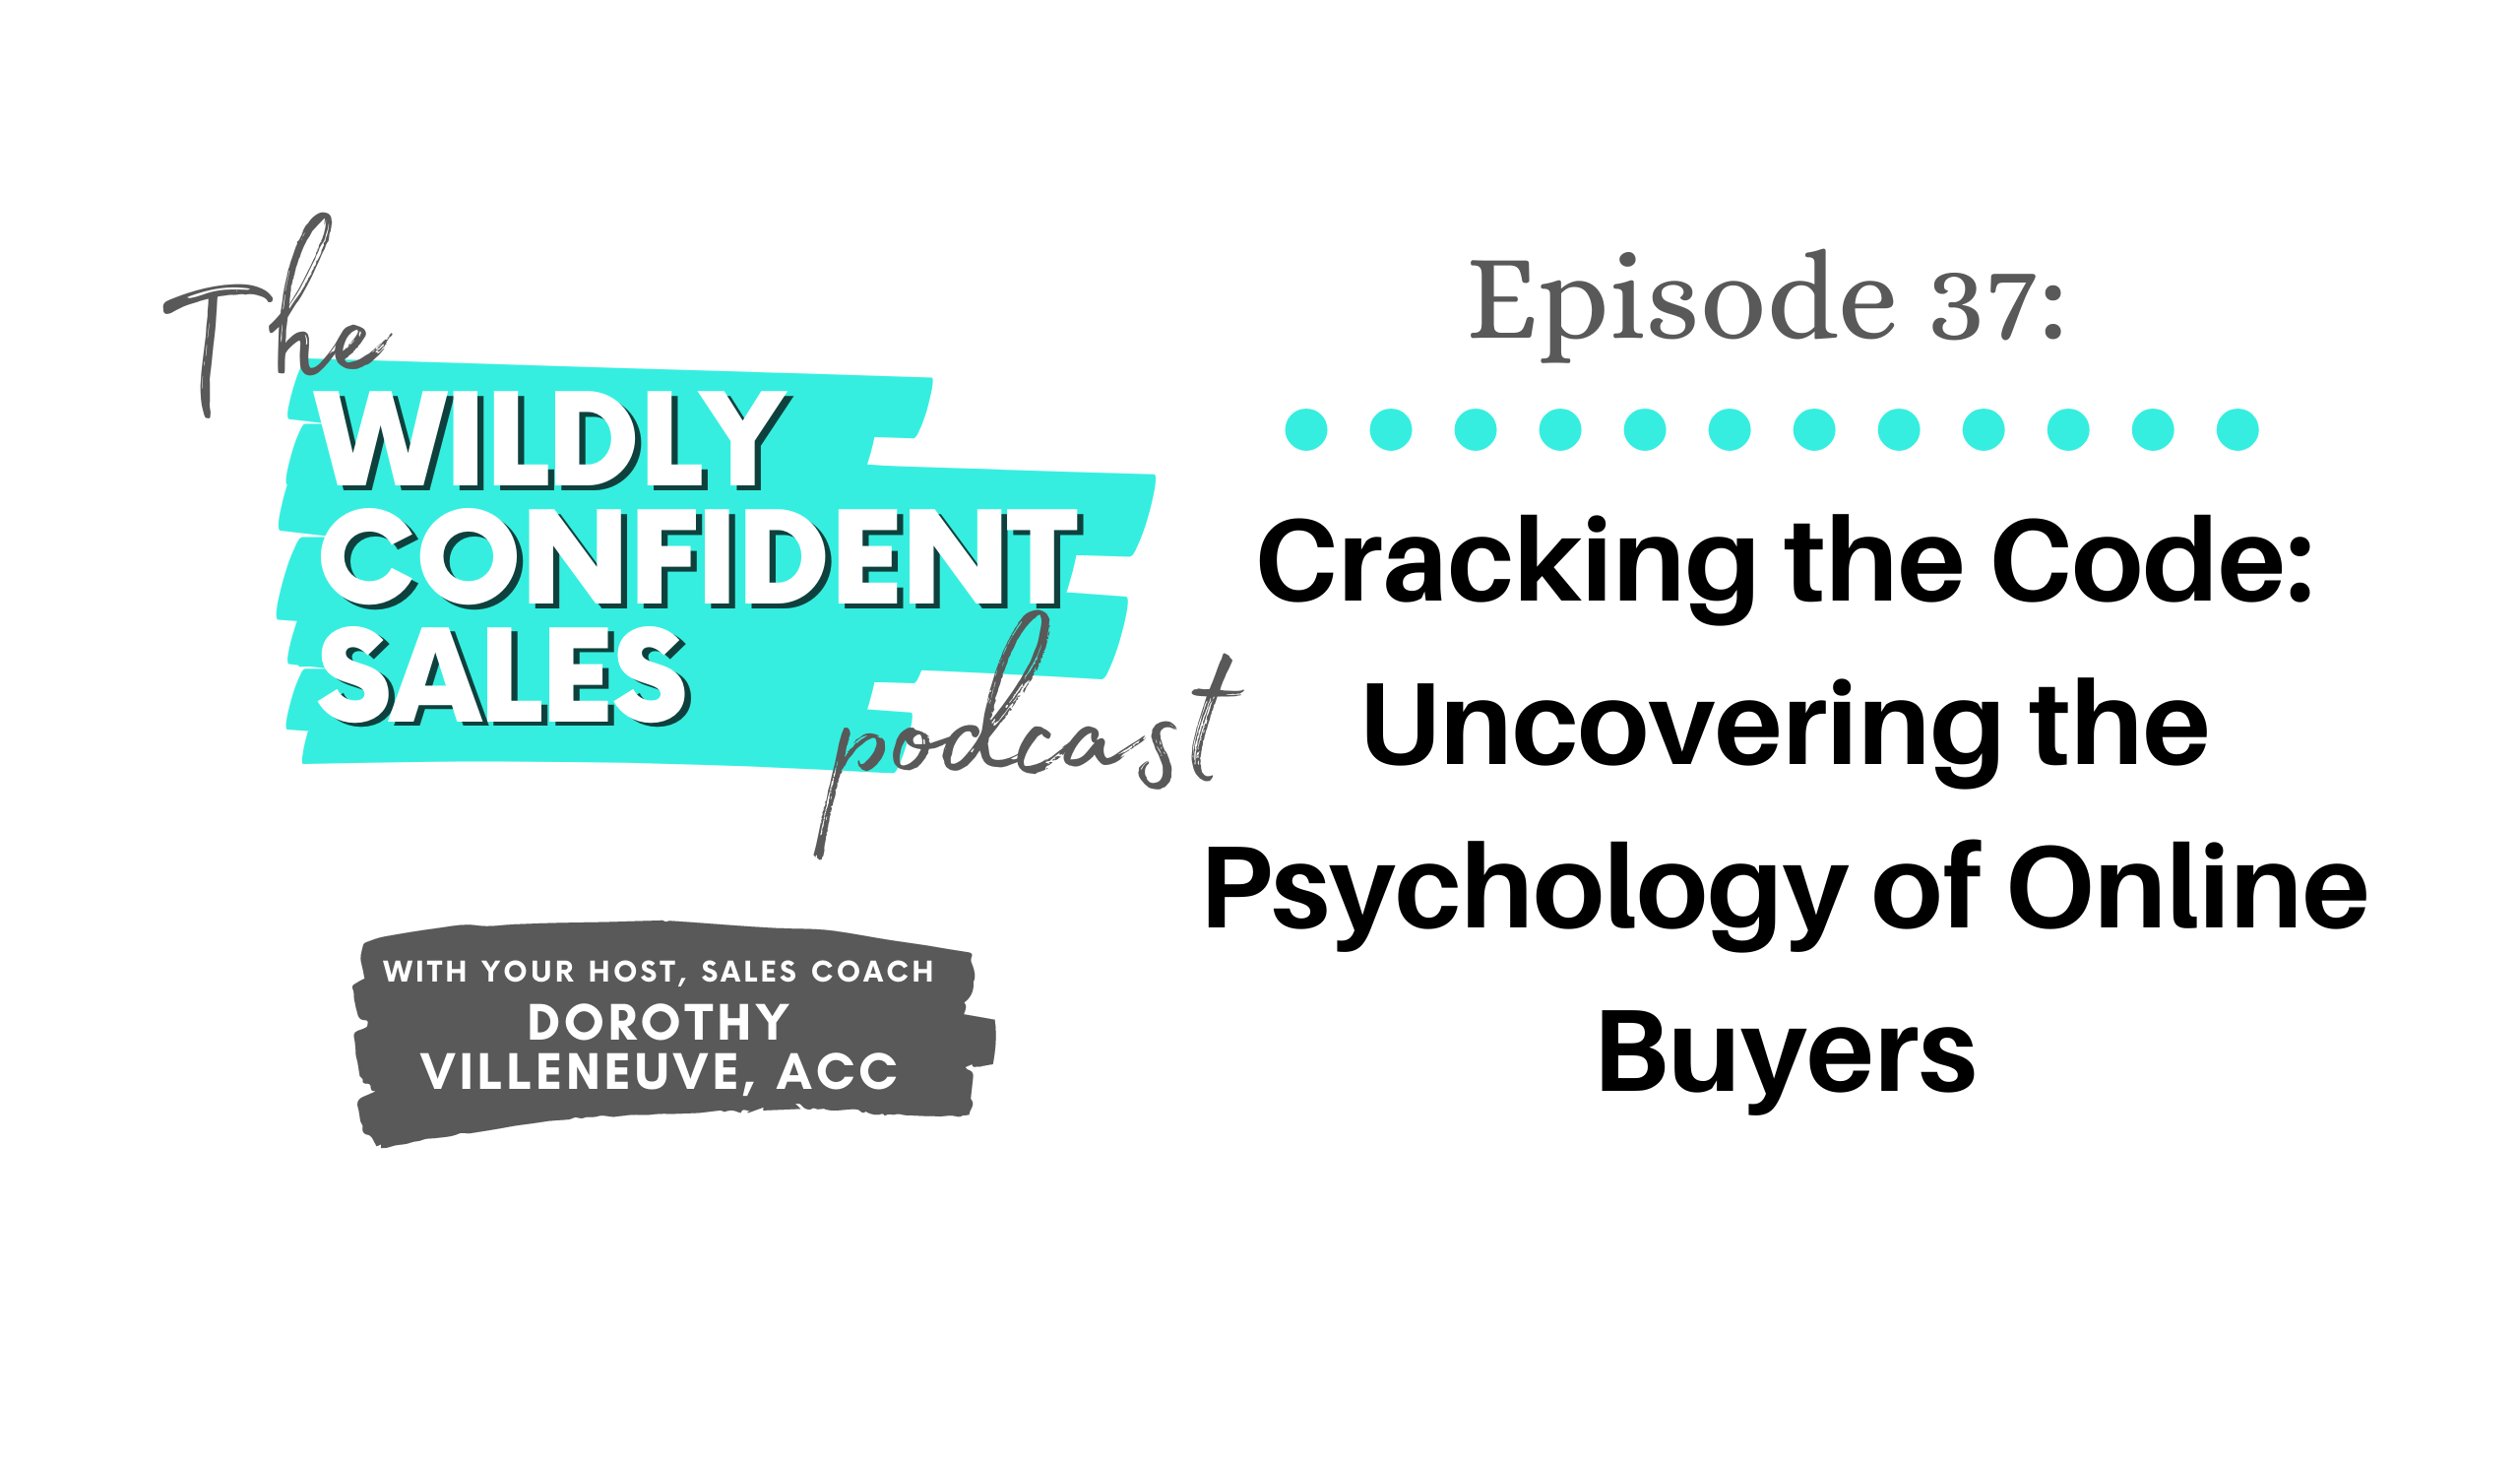 Wildly Confident Sales Cracking the Code - Uncovering Psychology of Online Buyers Dorothy Villeneuve